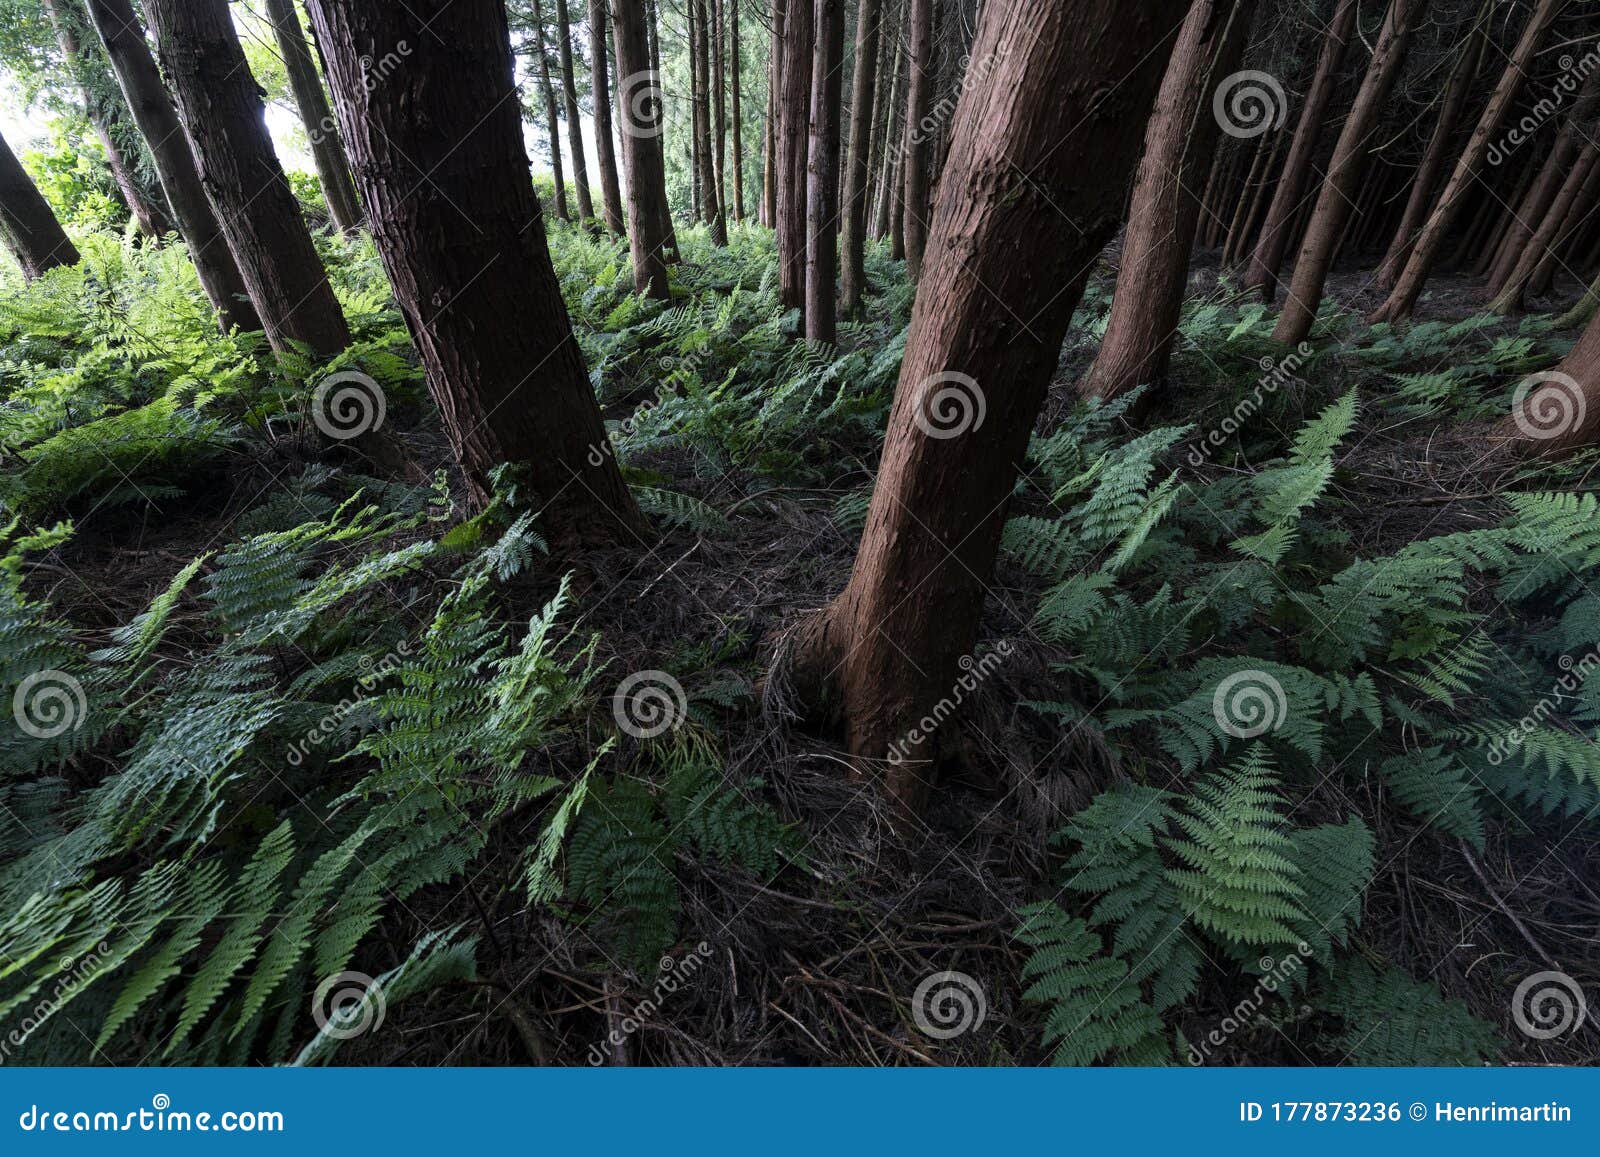 entrance of the dark forest at terceira island, azores